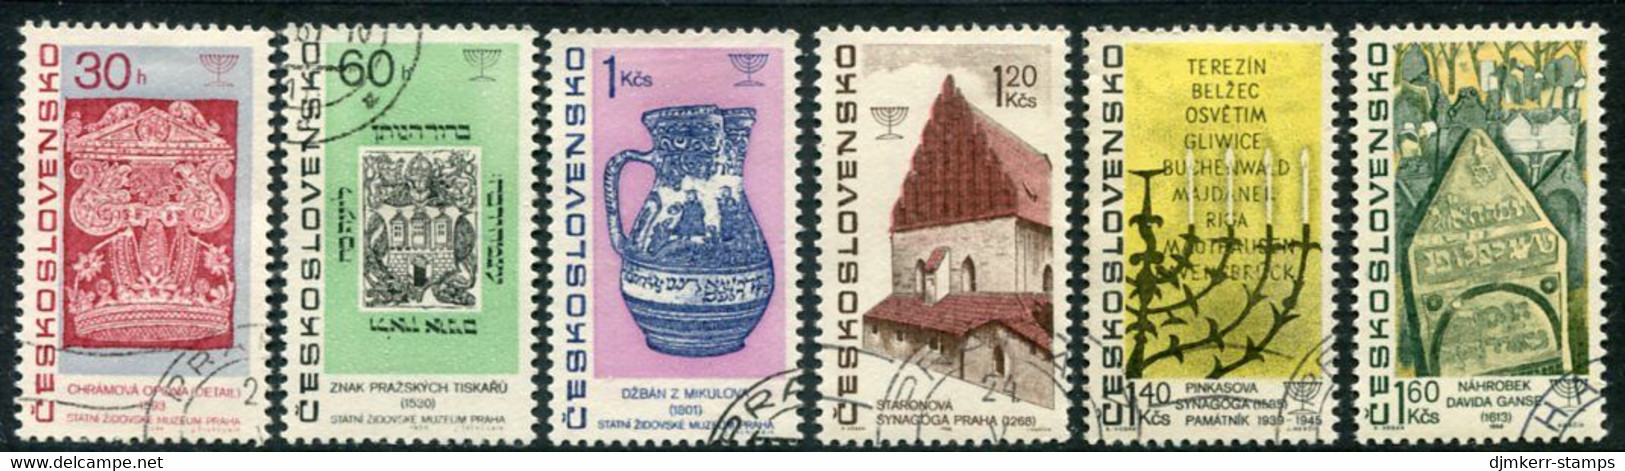 CZECHOSLOVAKIA 1967 Jewish Cultural Artifacts Used.  Michel  1709-14 - Used Stamps